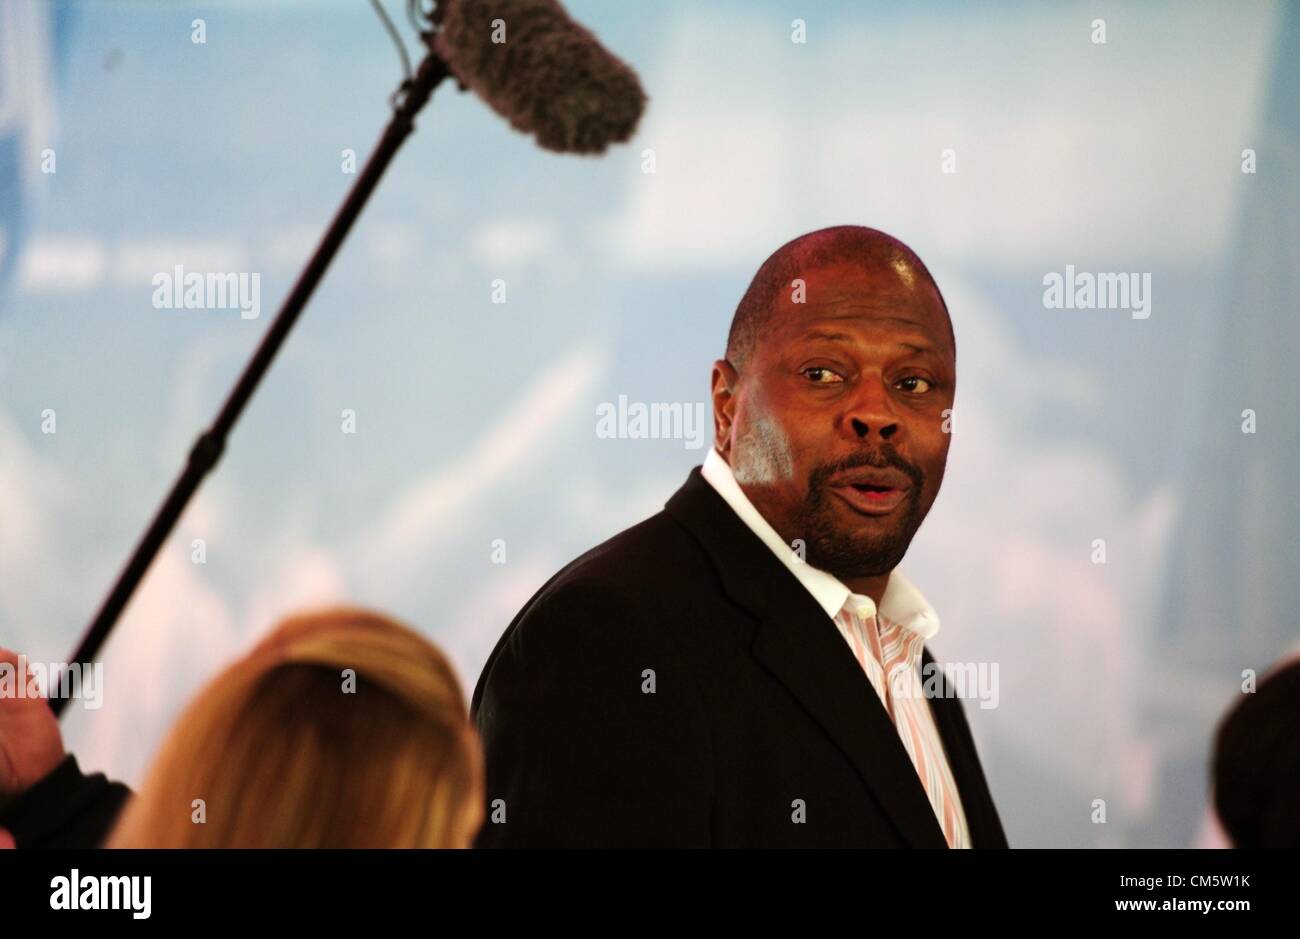 Photos of patrick ewing hi-res stock photography and images - Alamy